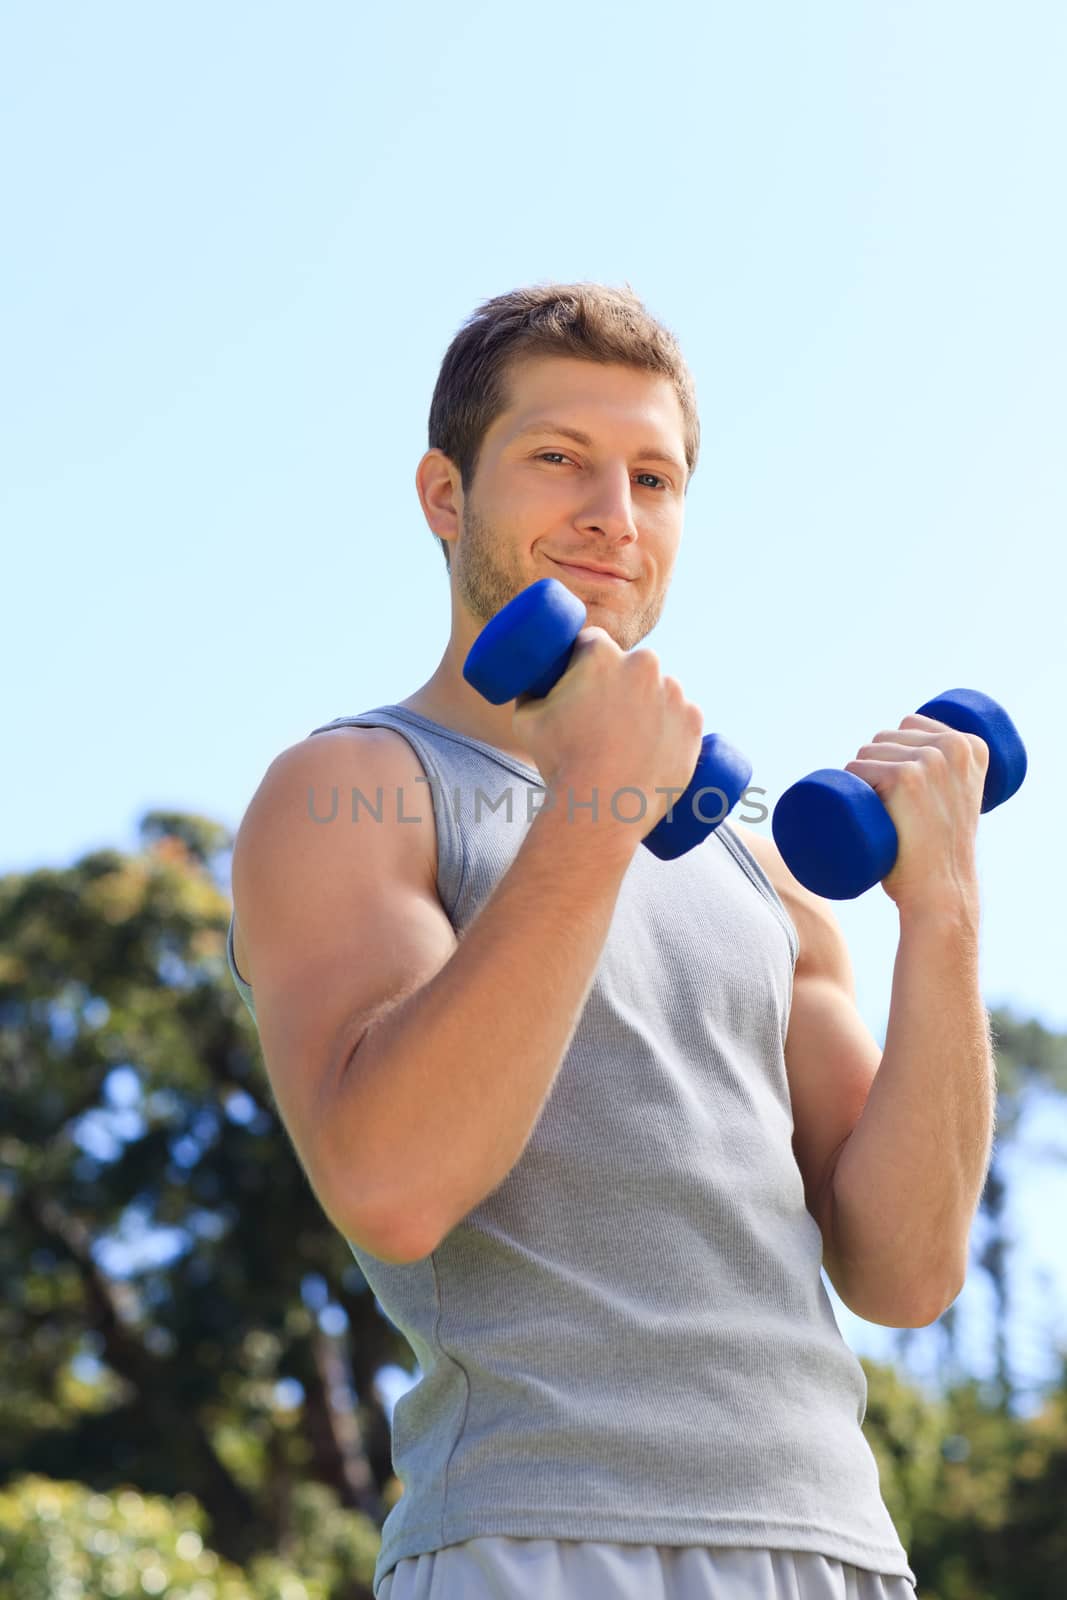 Young man doing his exercises in the park during the summer